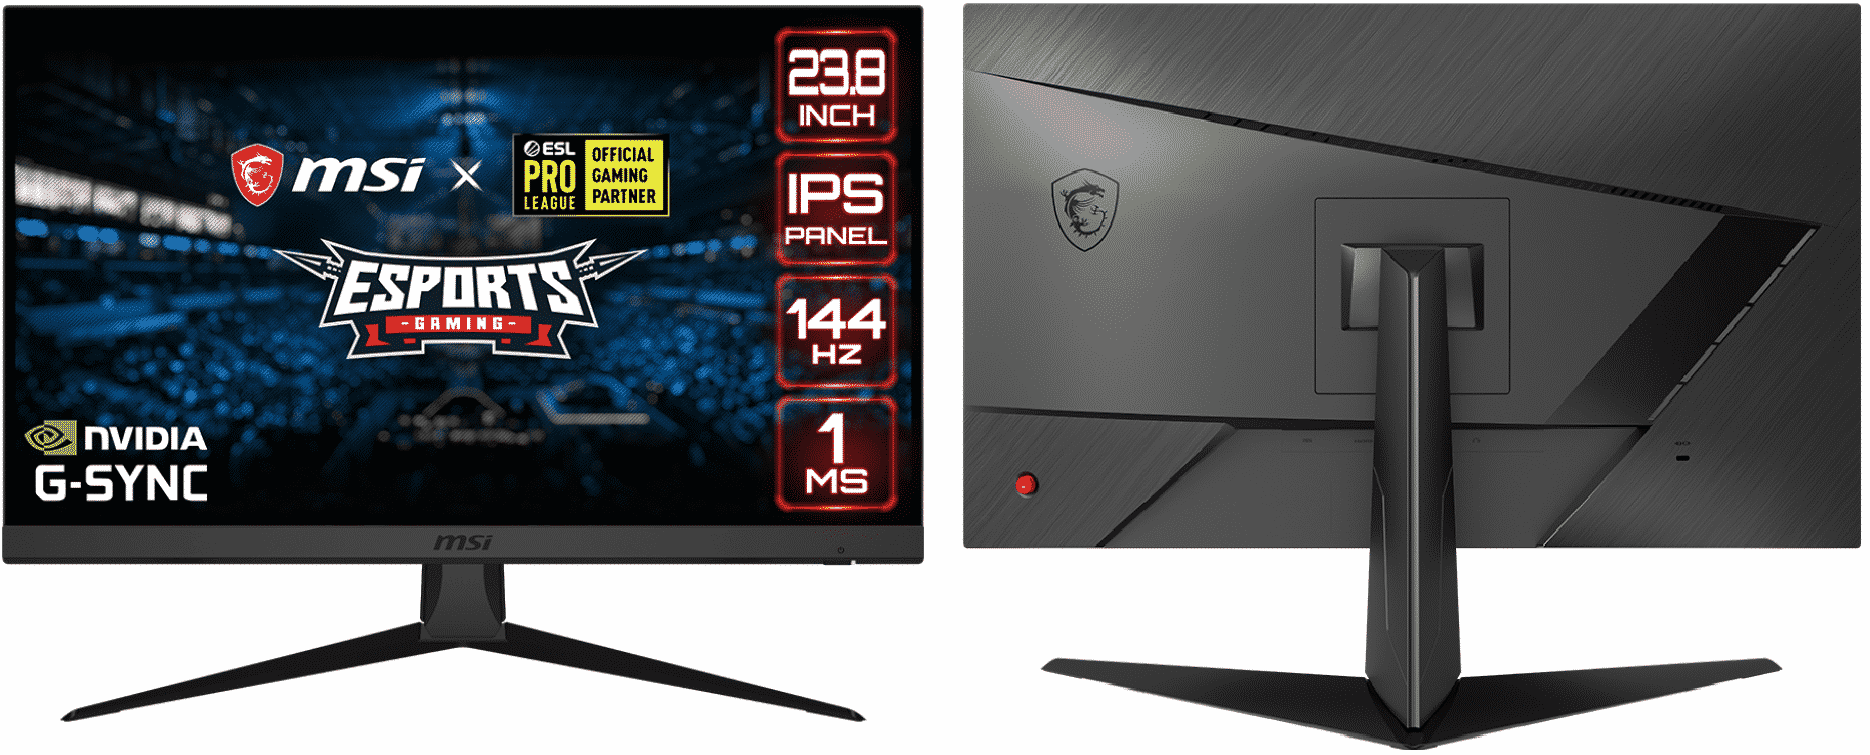 MSI Optix G242 gaming monitor: specs, price and release date